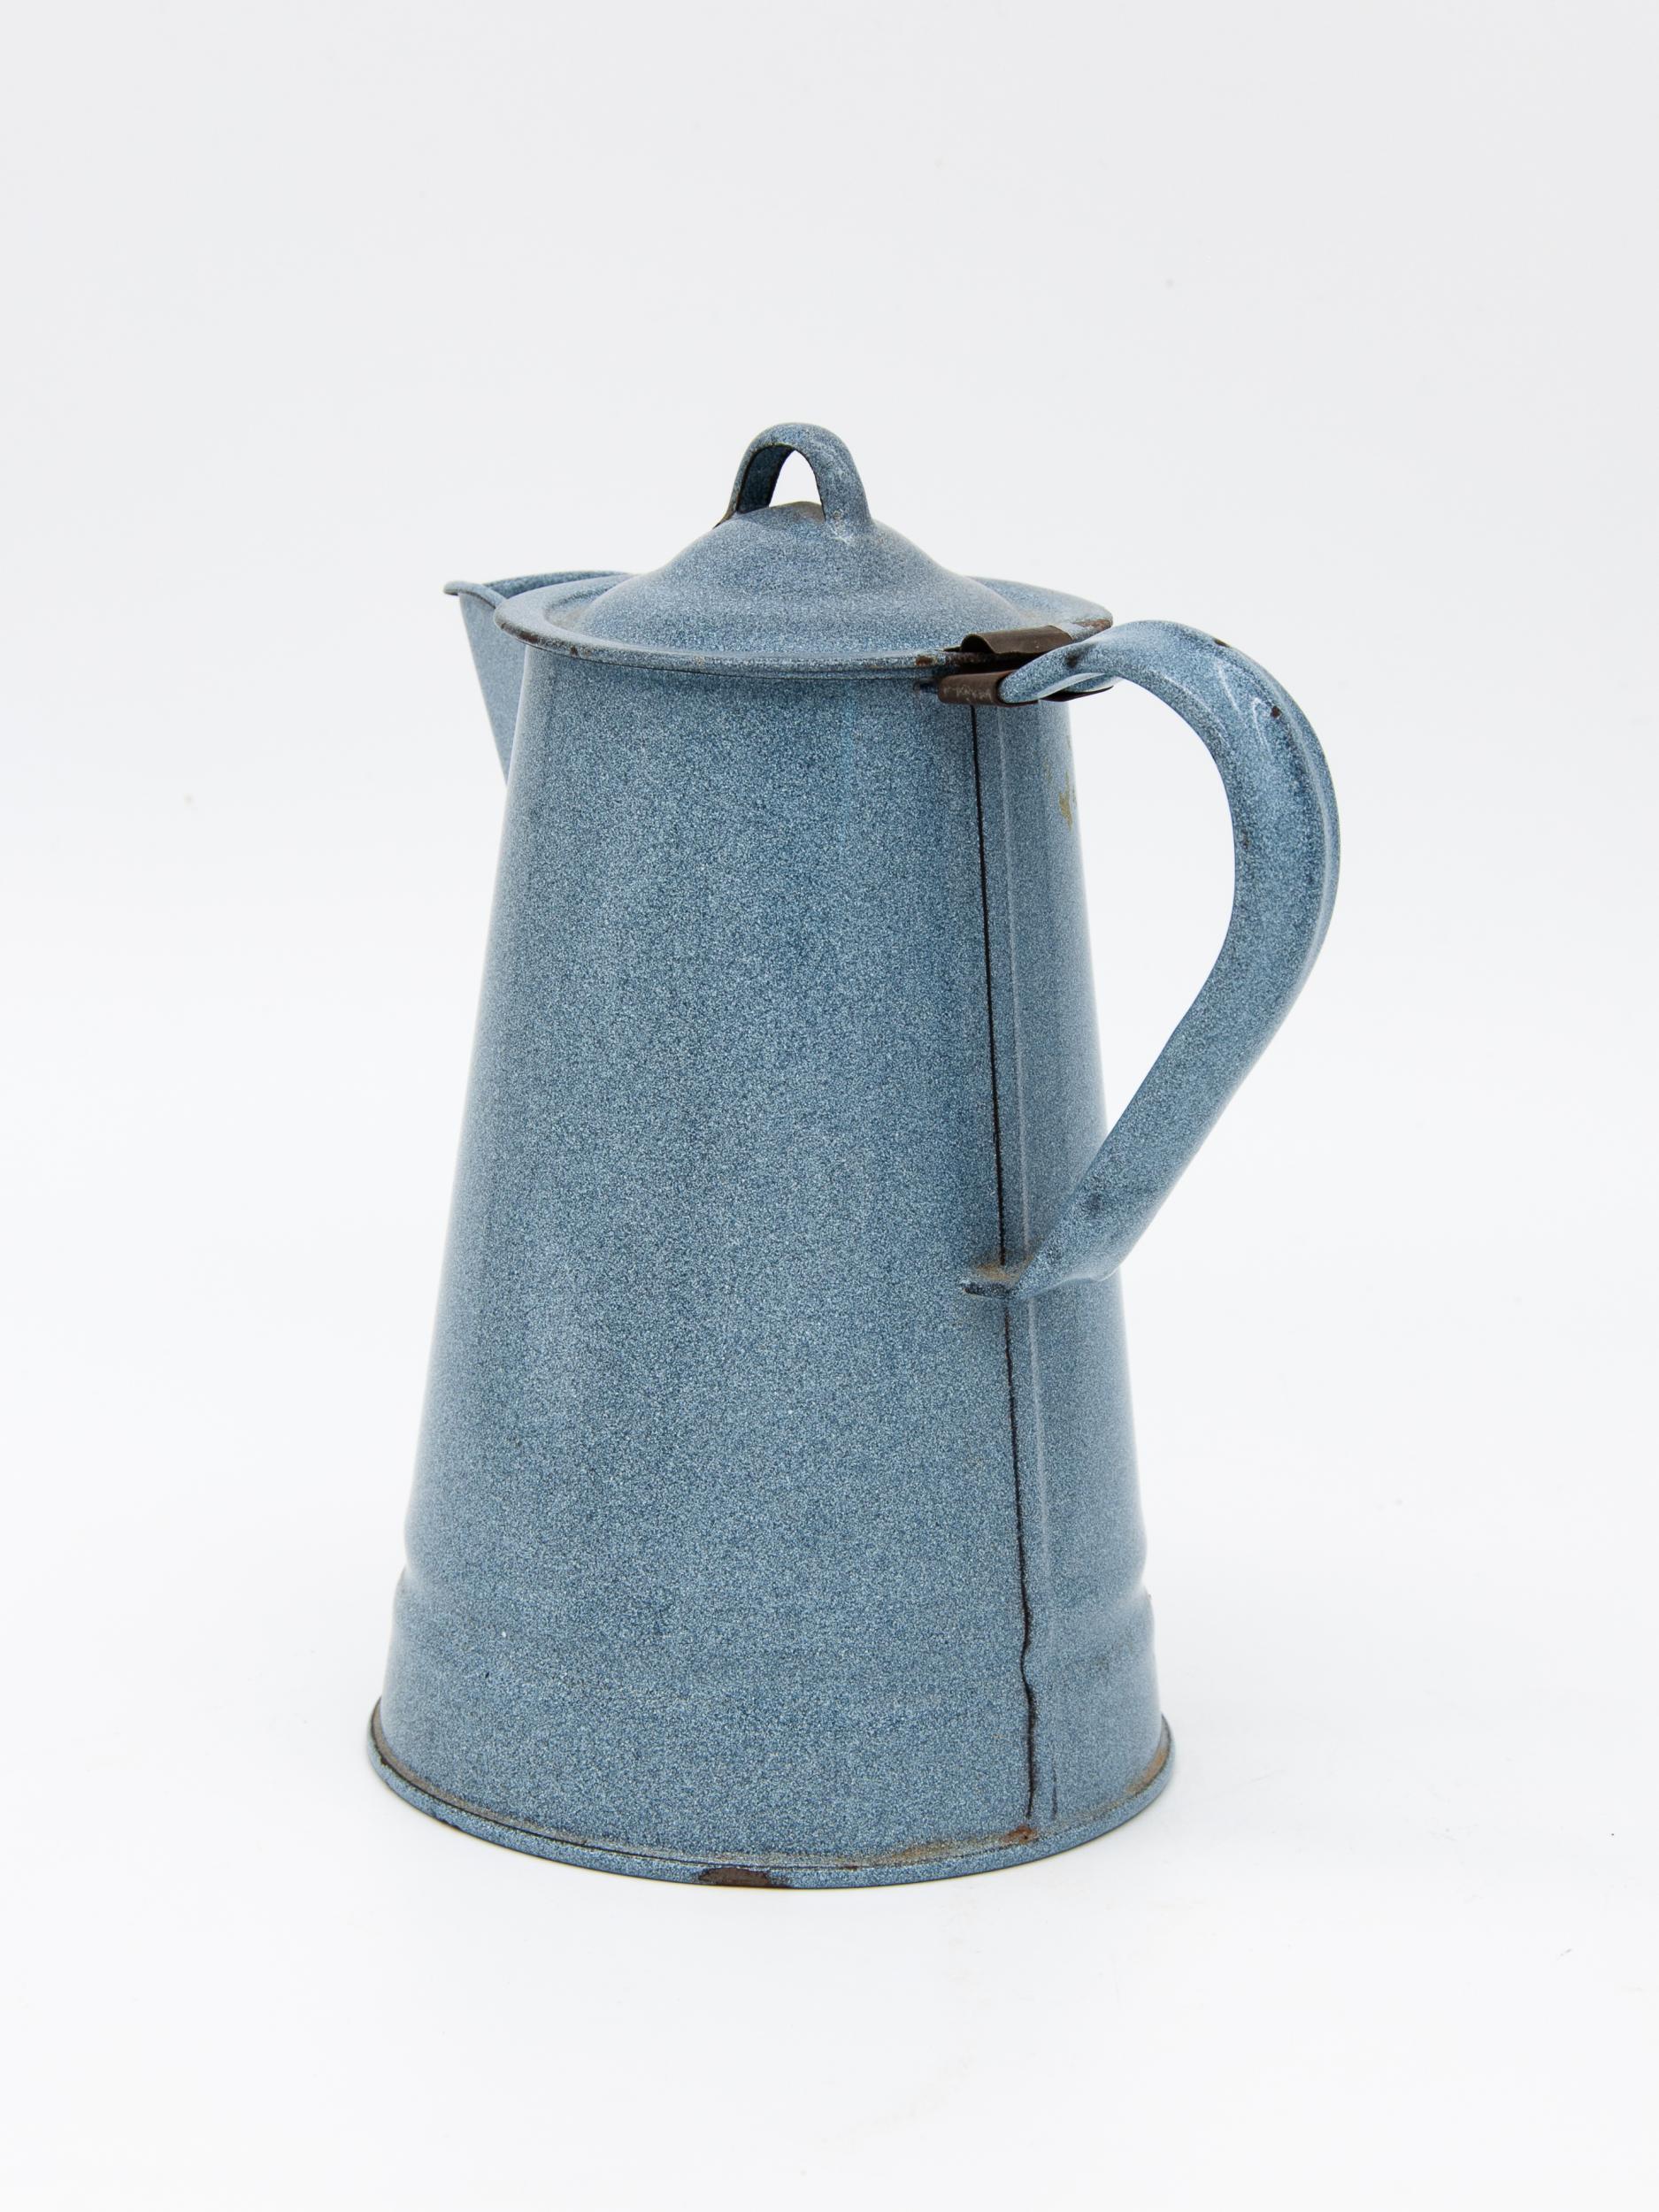 This tin pitcher has a beautiful shape and color to it, a muted speckled blue.While originally for use in the kitchen this now makes an amazingly decorative watering can. Outfitted with a matching removable lid. Some paint chipping but wear is